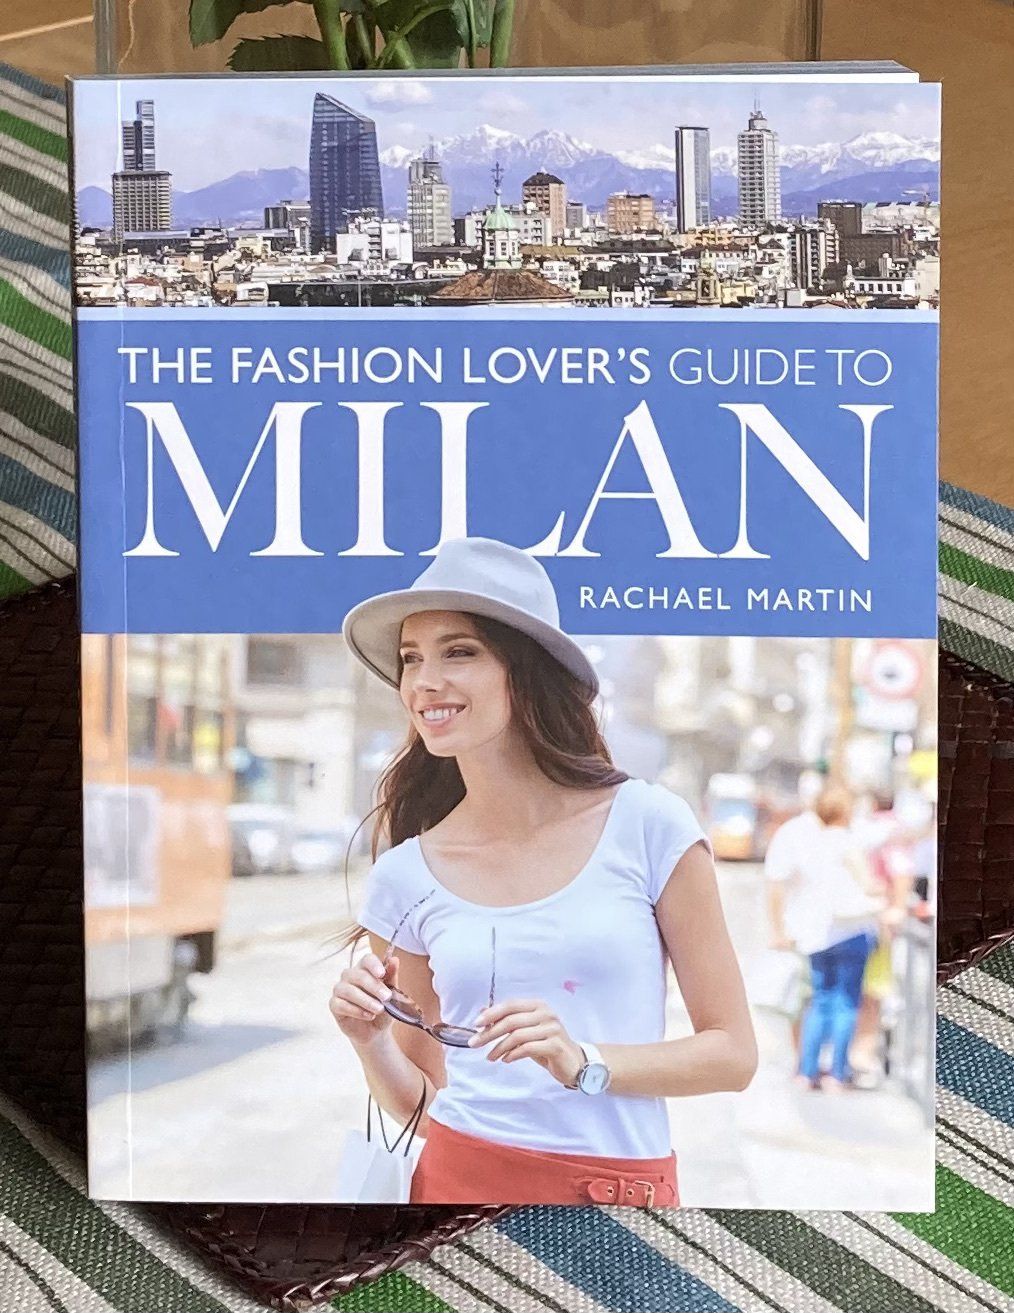 Book: The Fashion Lover's Guide to Milan